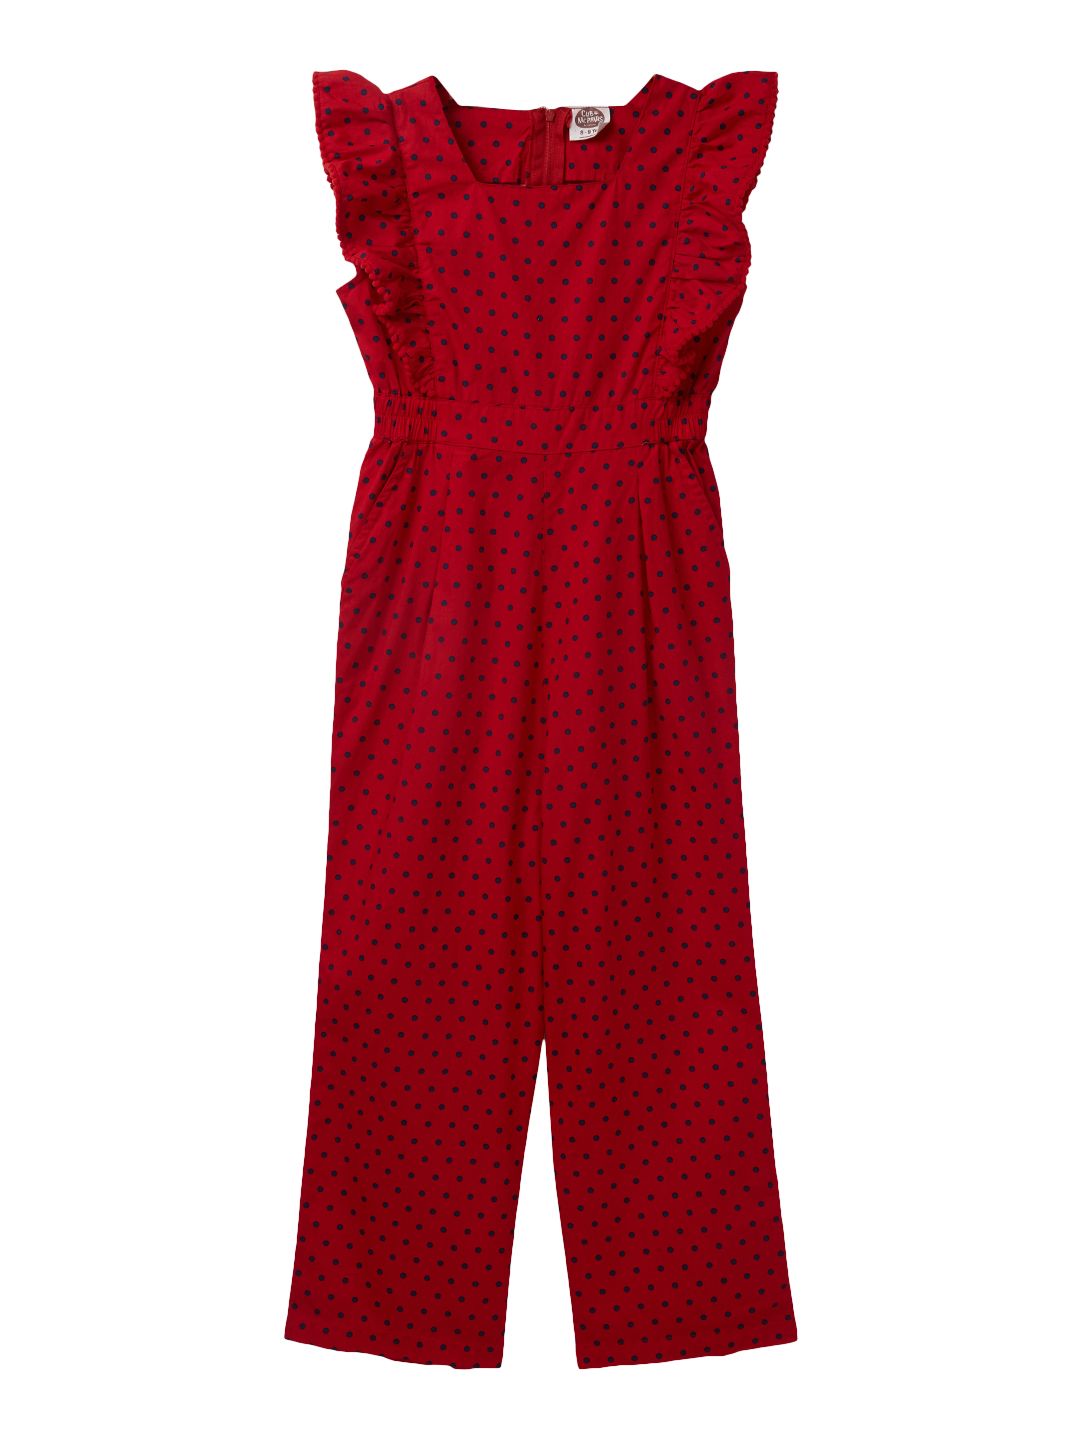 Red Jumpsuits for Girls Online at Lowest Price in India